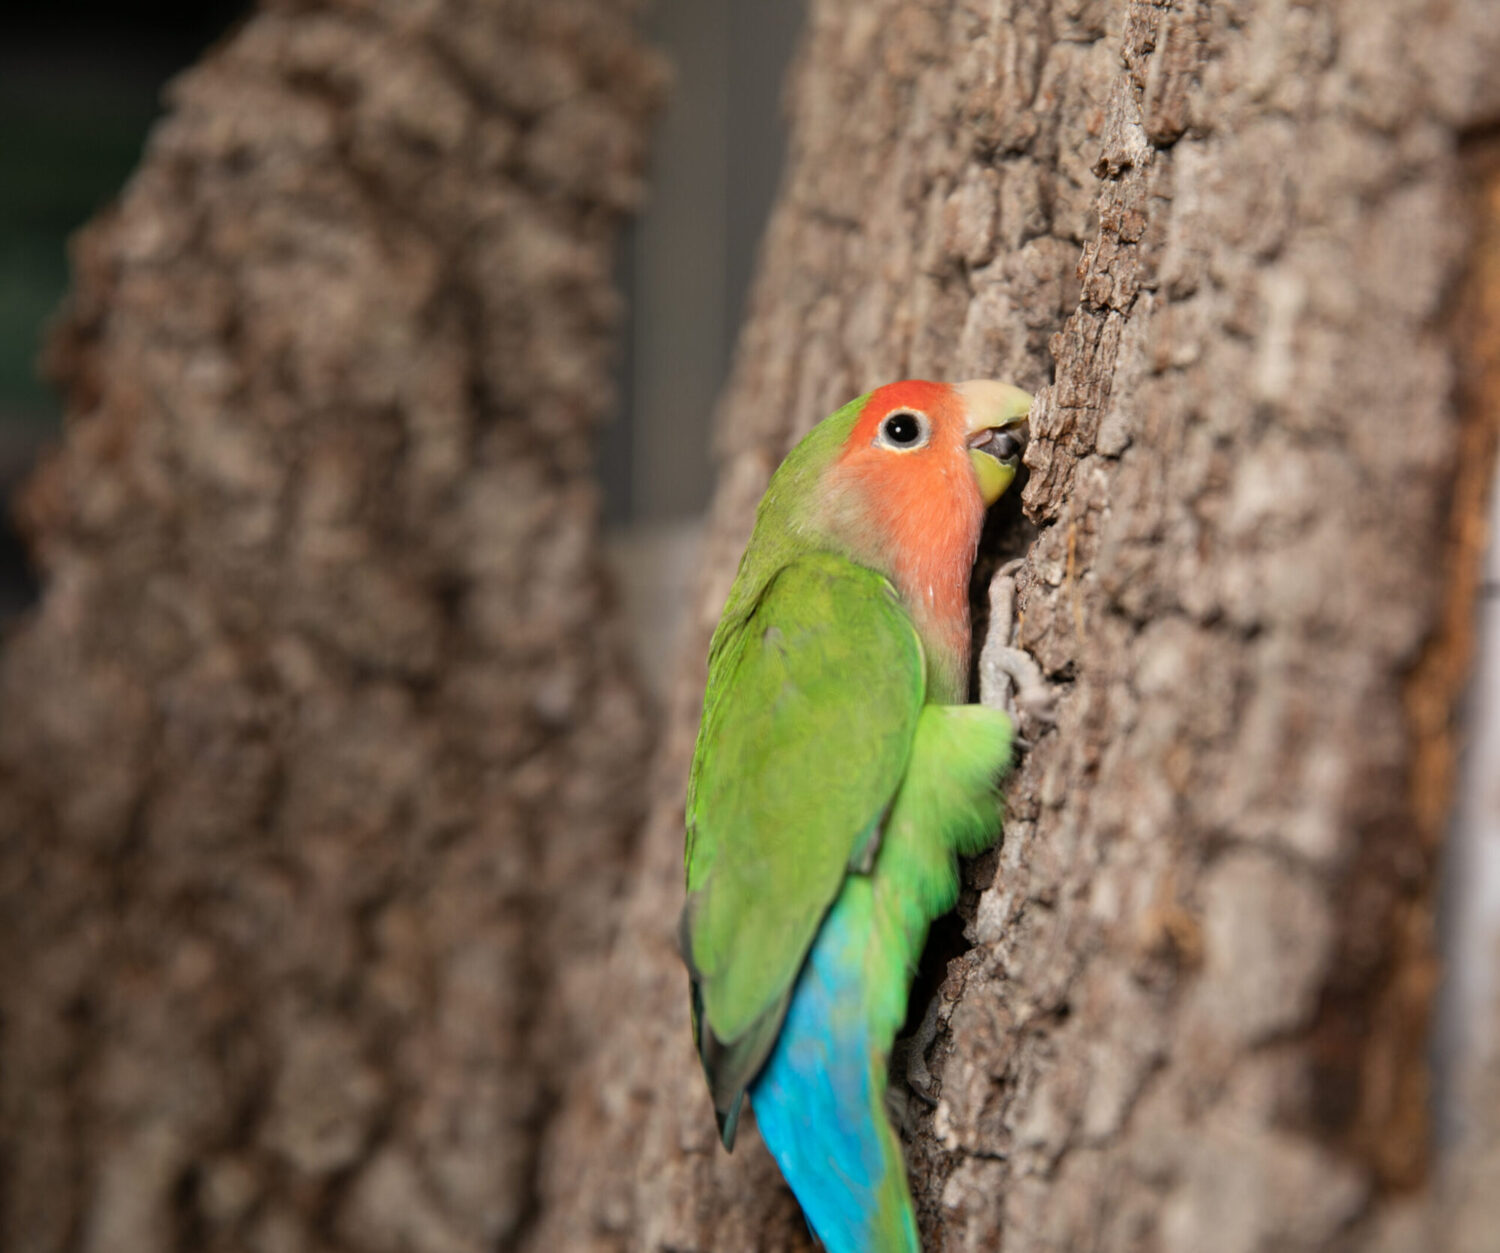 A colorful parrot hooked onto a tree with its beak.